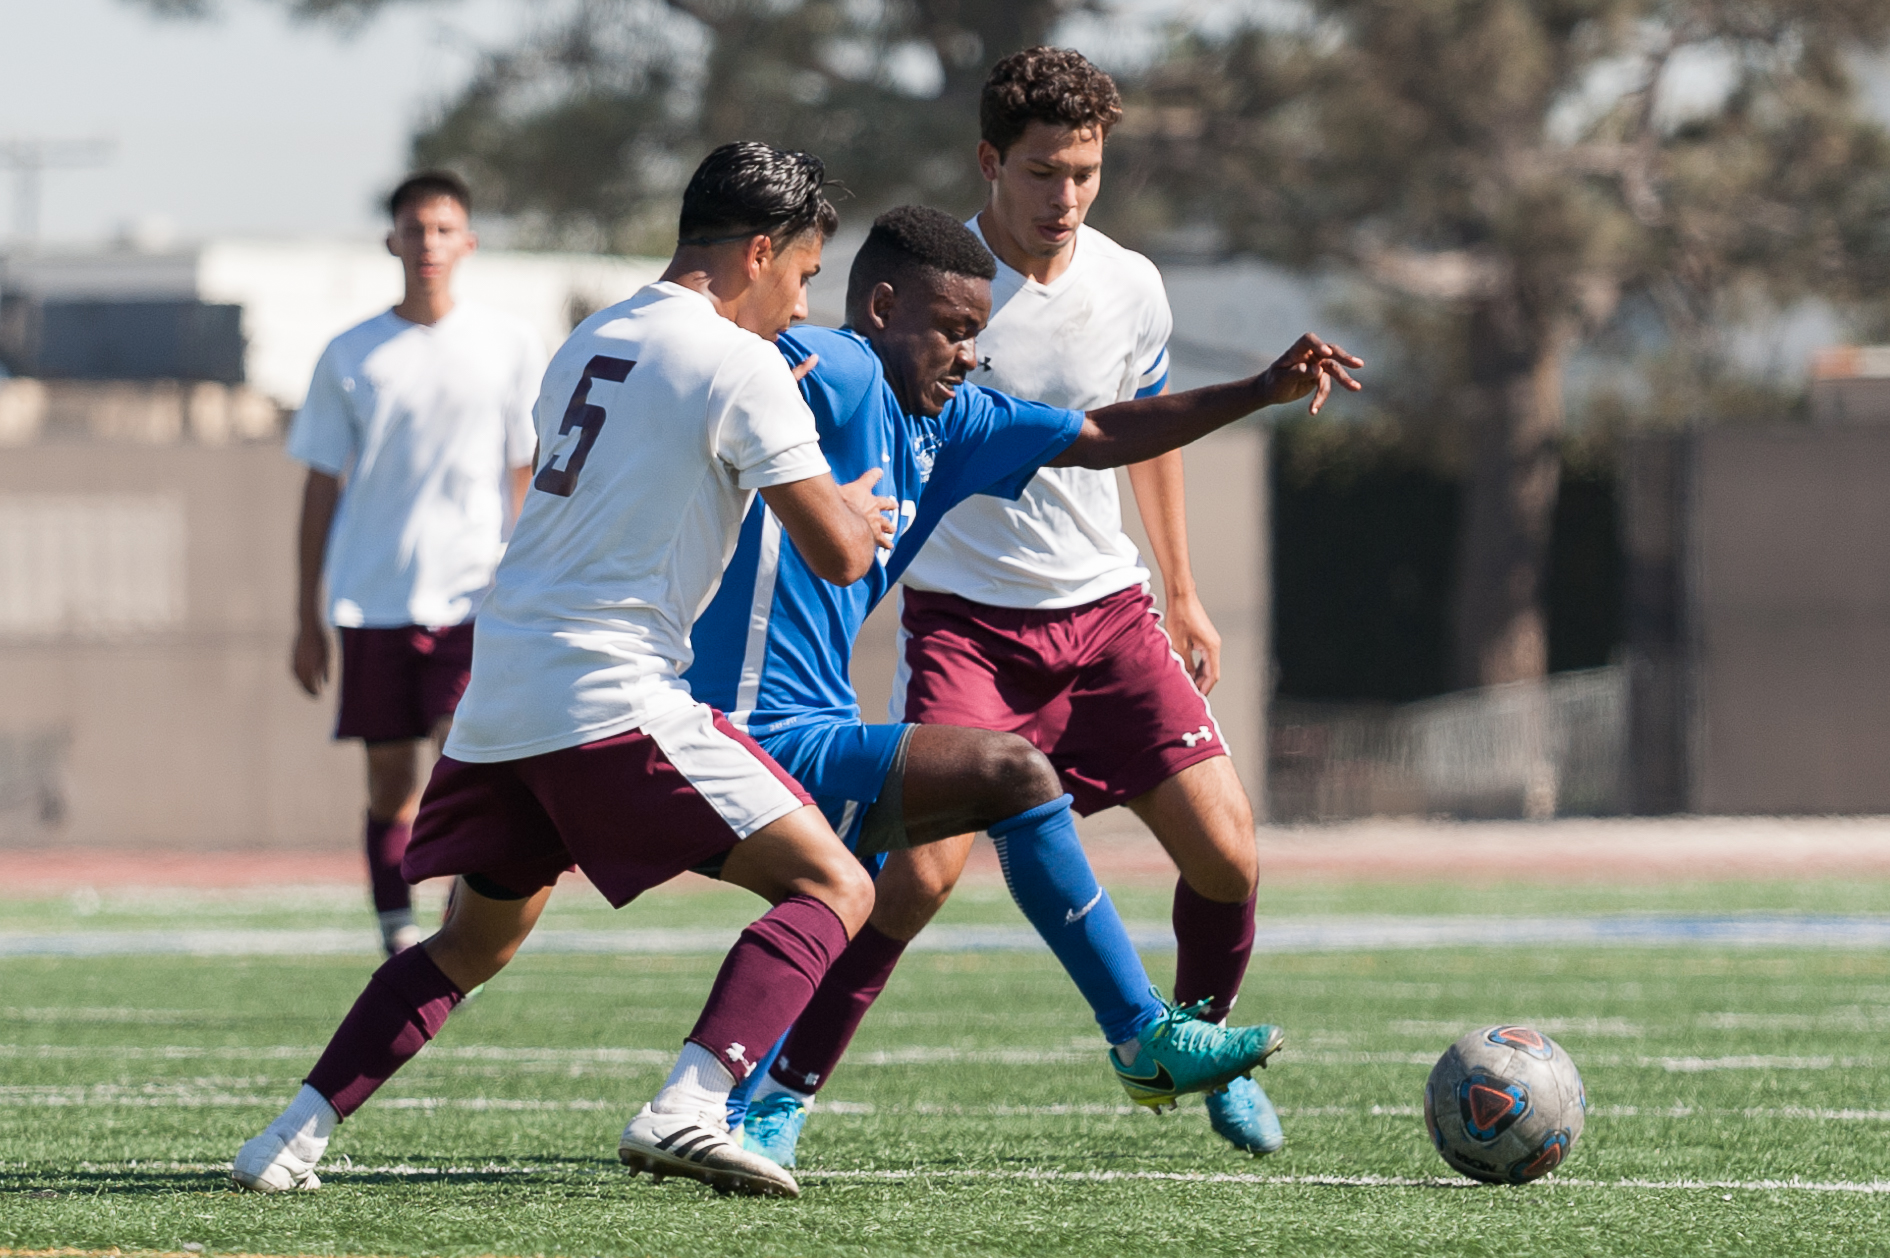  Midfielder Divine Simbu (23,right) of Santa Monica College competes with Angel Barajas (5,left) of Victor Valley College for possession of the ball. The Santa Monica College Corsairs won the game 2-0 against the Victor Valley Rams. The match was hel